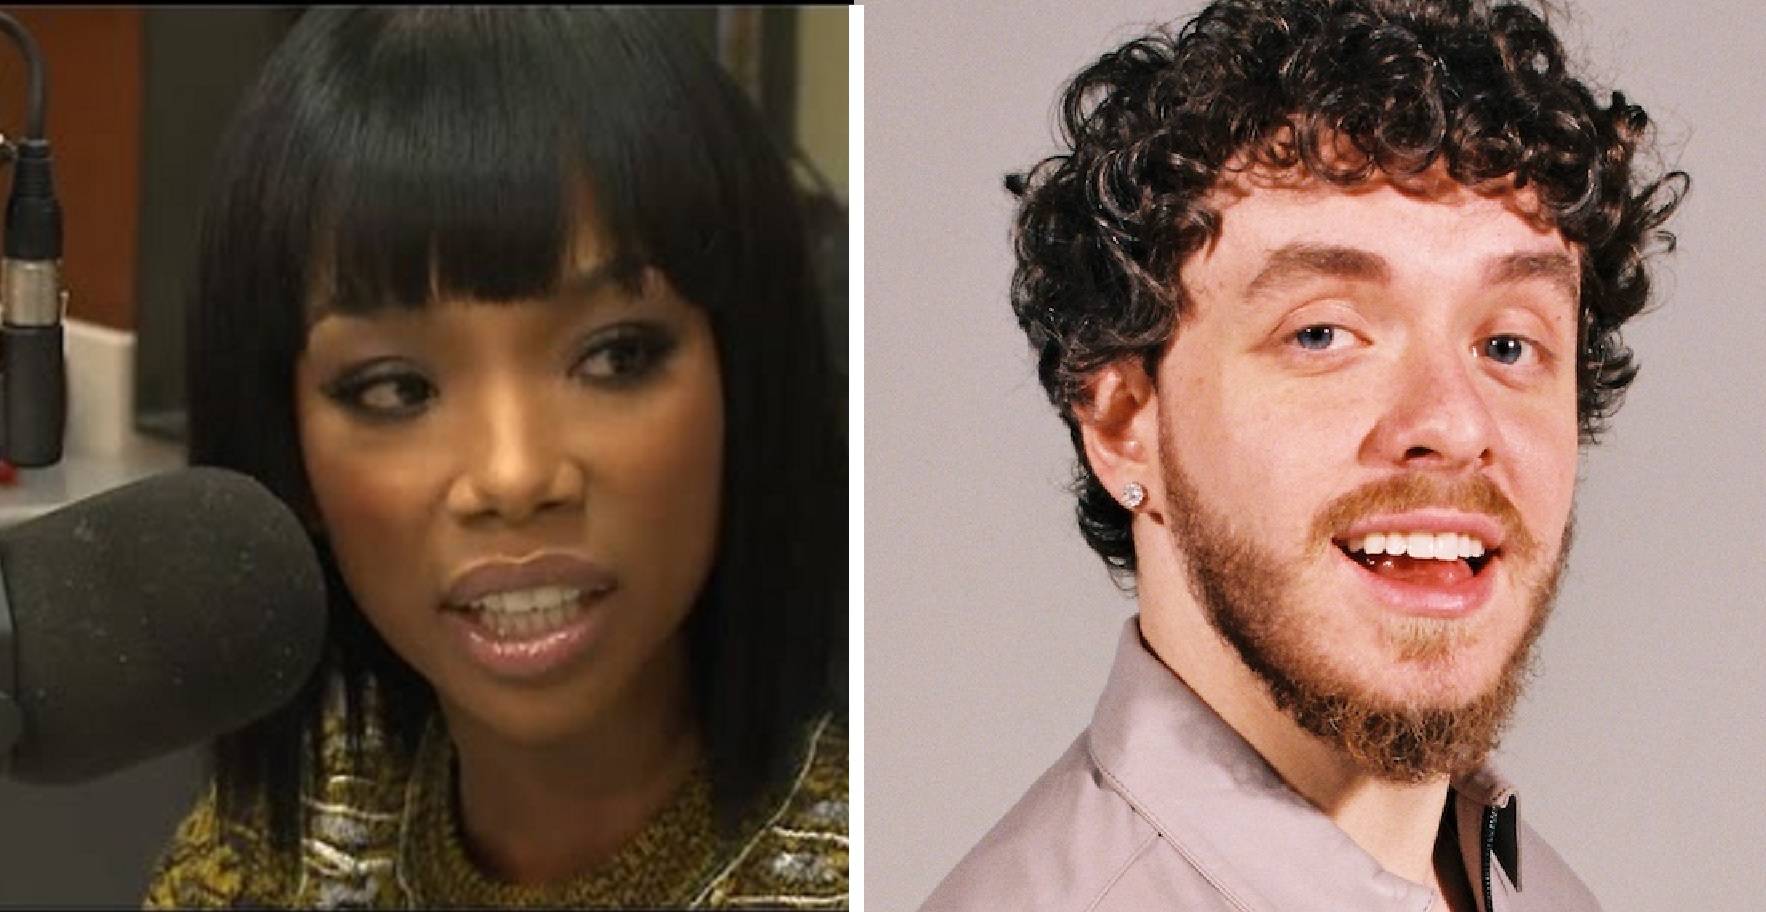 Brandy Responds To Jack Harlow Not Knowing Ray J is Her Brother, “I will murk this dude in rap at 43”